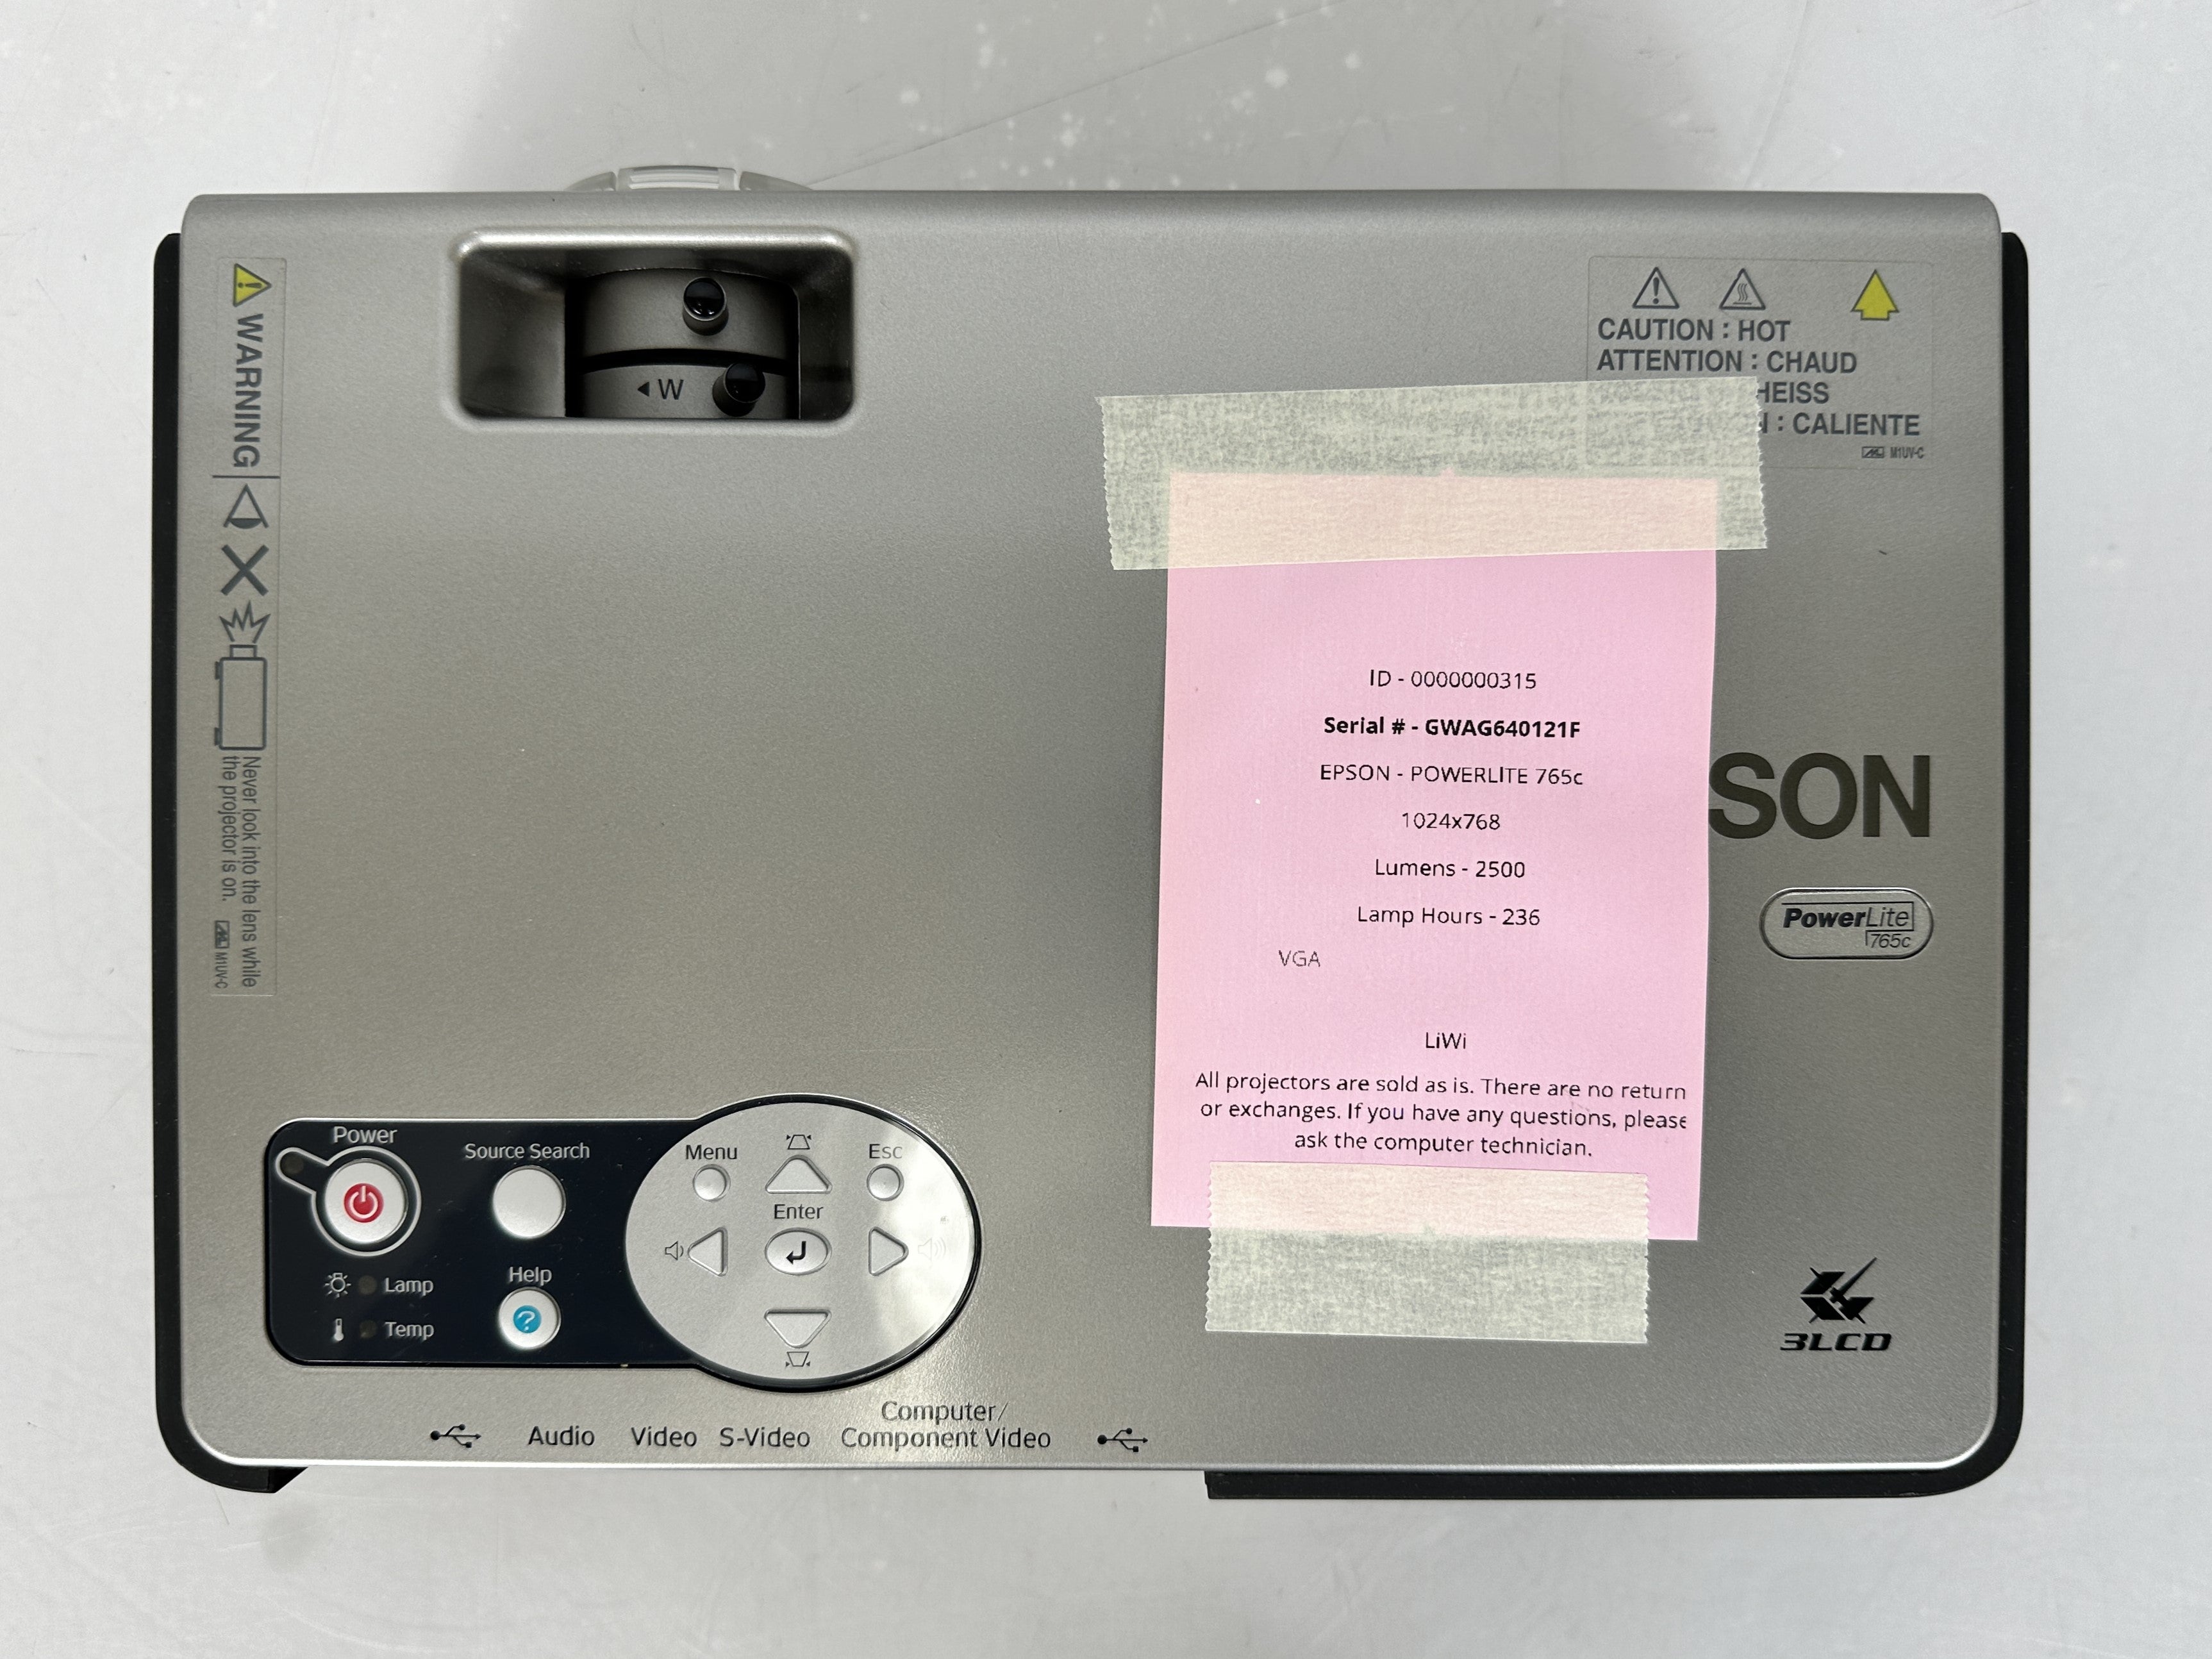 Epson Powerlite 765c LCD Projector w/ Manual & Carrying Case (236 Hours)